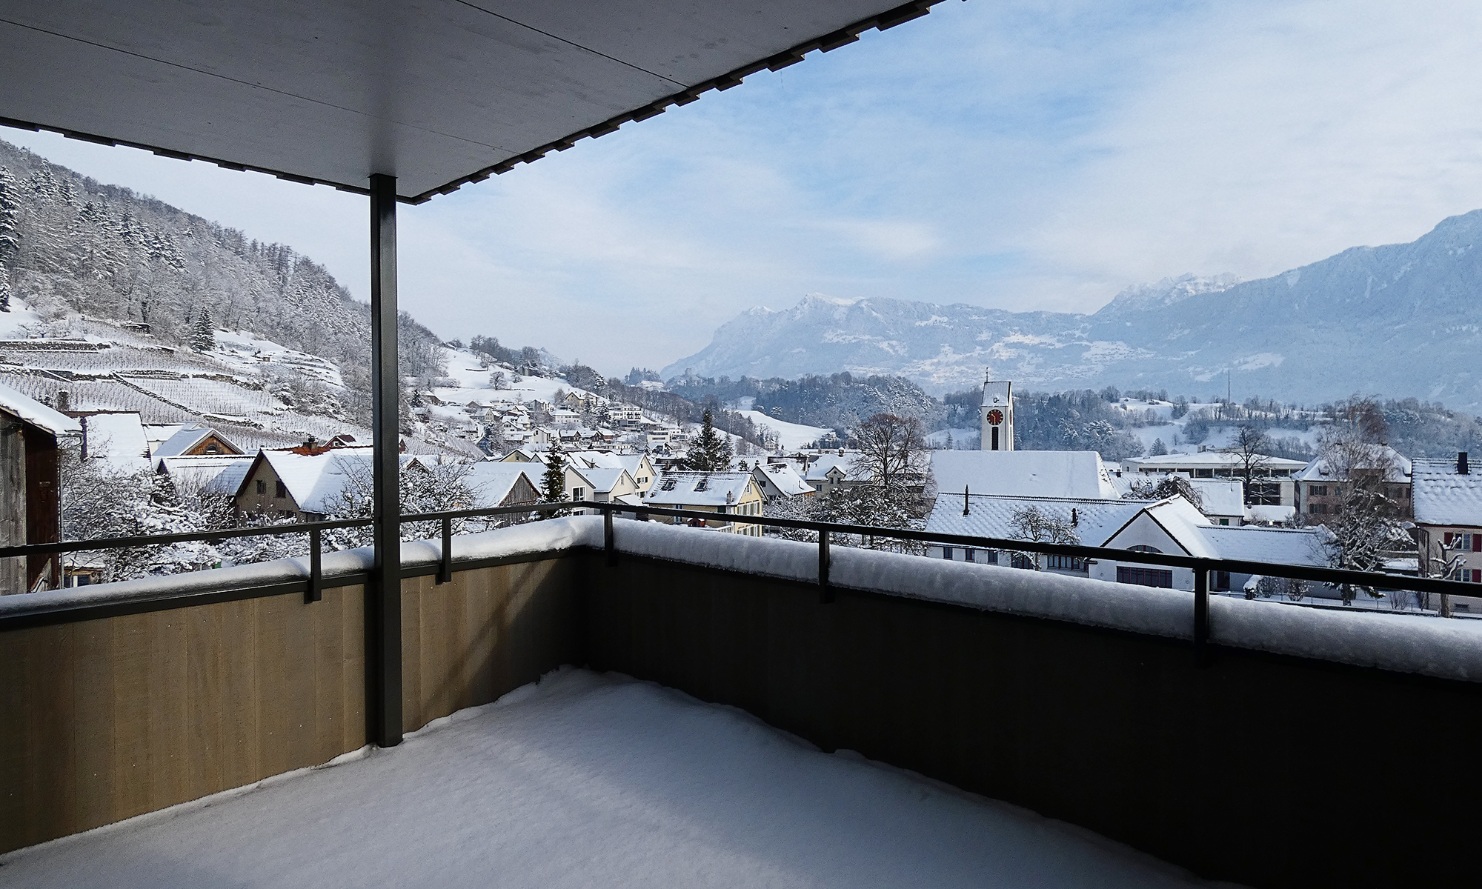 A wintry panorama from one of the apartment building’s balconies, looking towards vineyards, the village and mountains